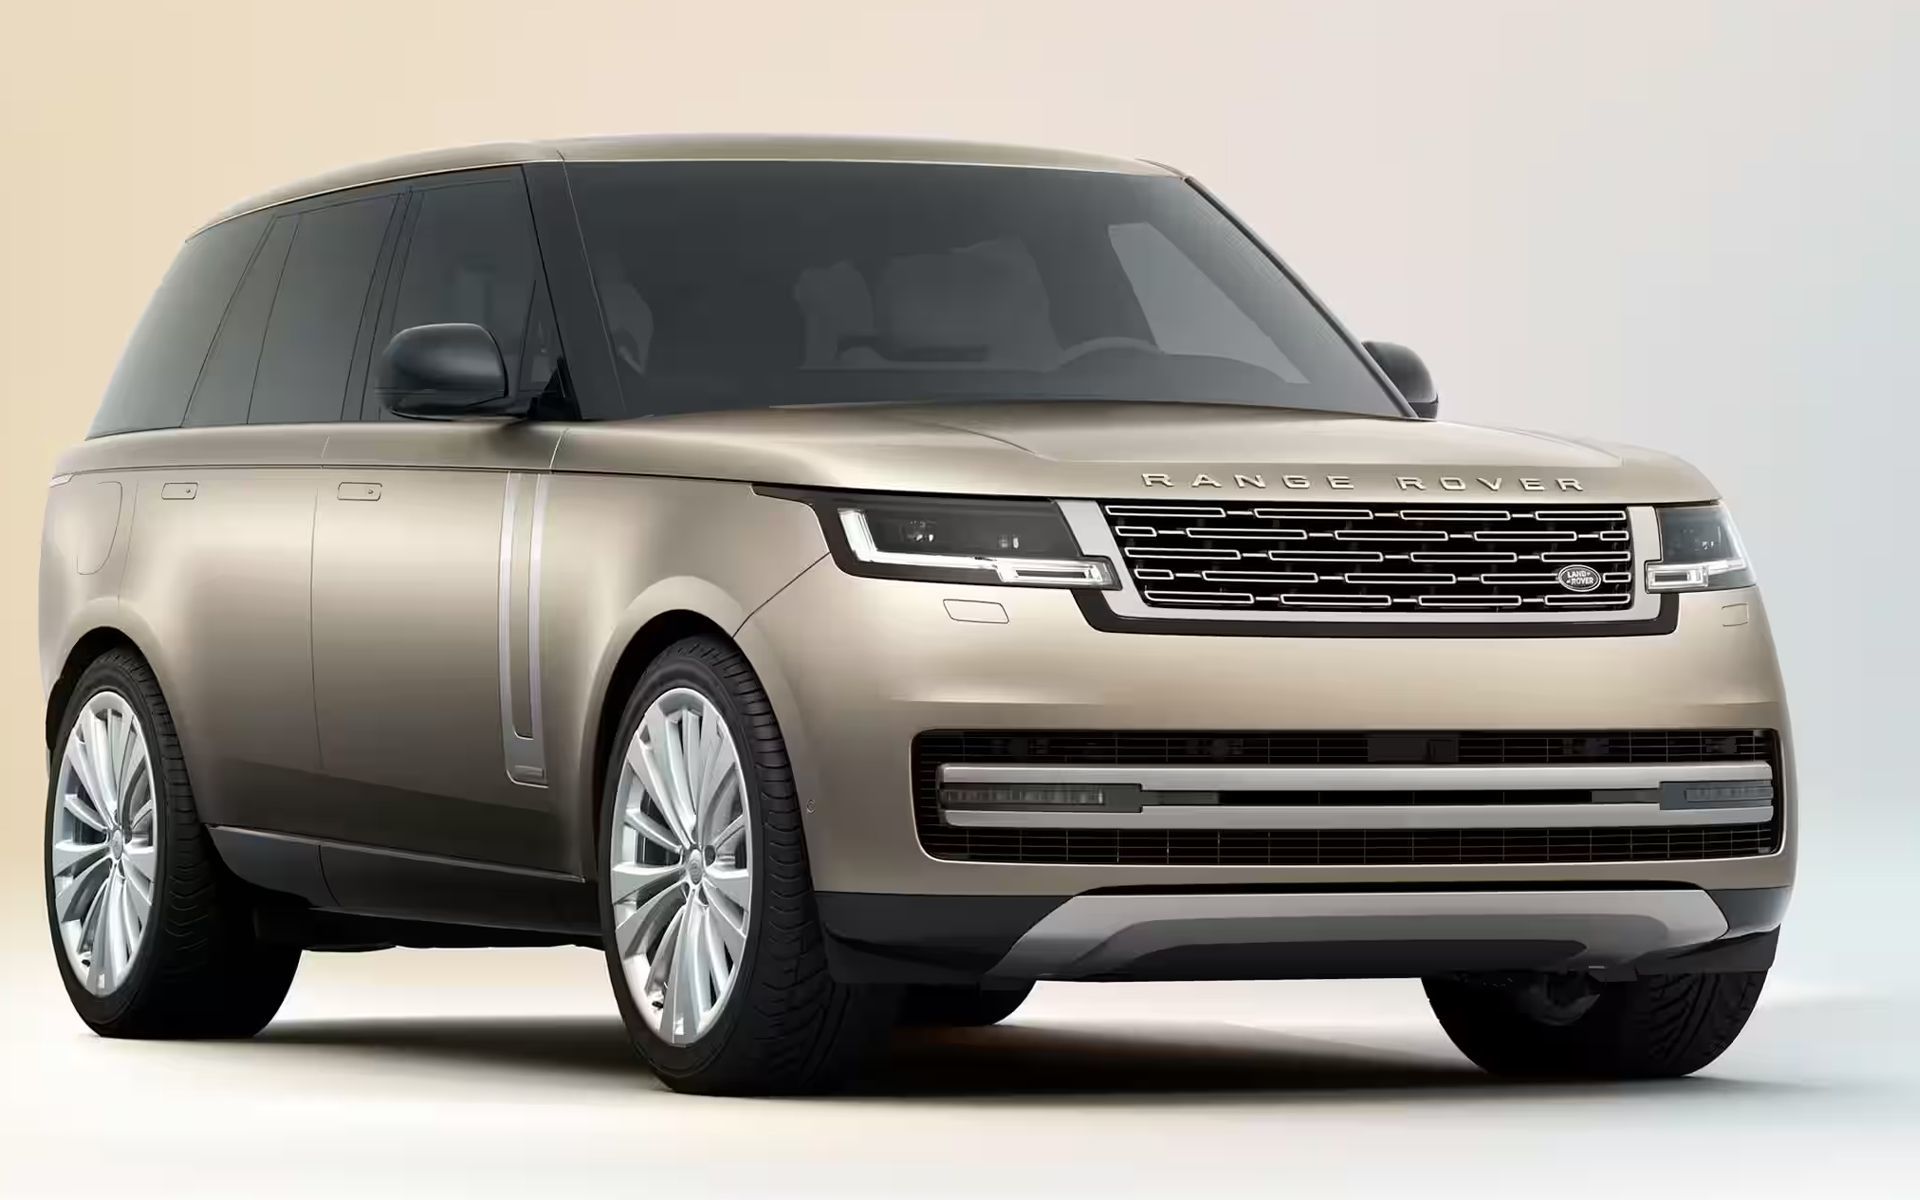 New 2023 Range Rover full size luxury SUV in Vancouver